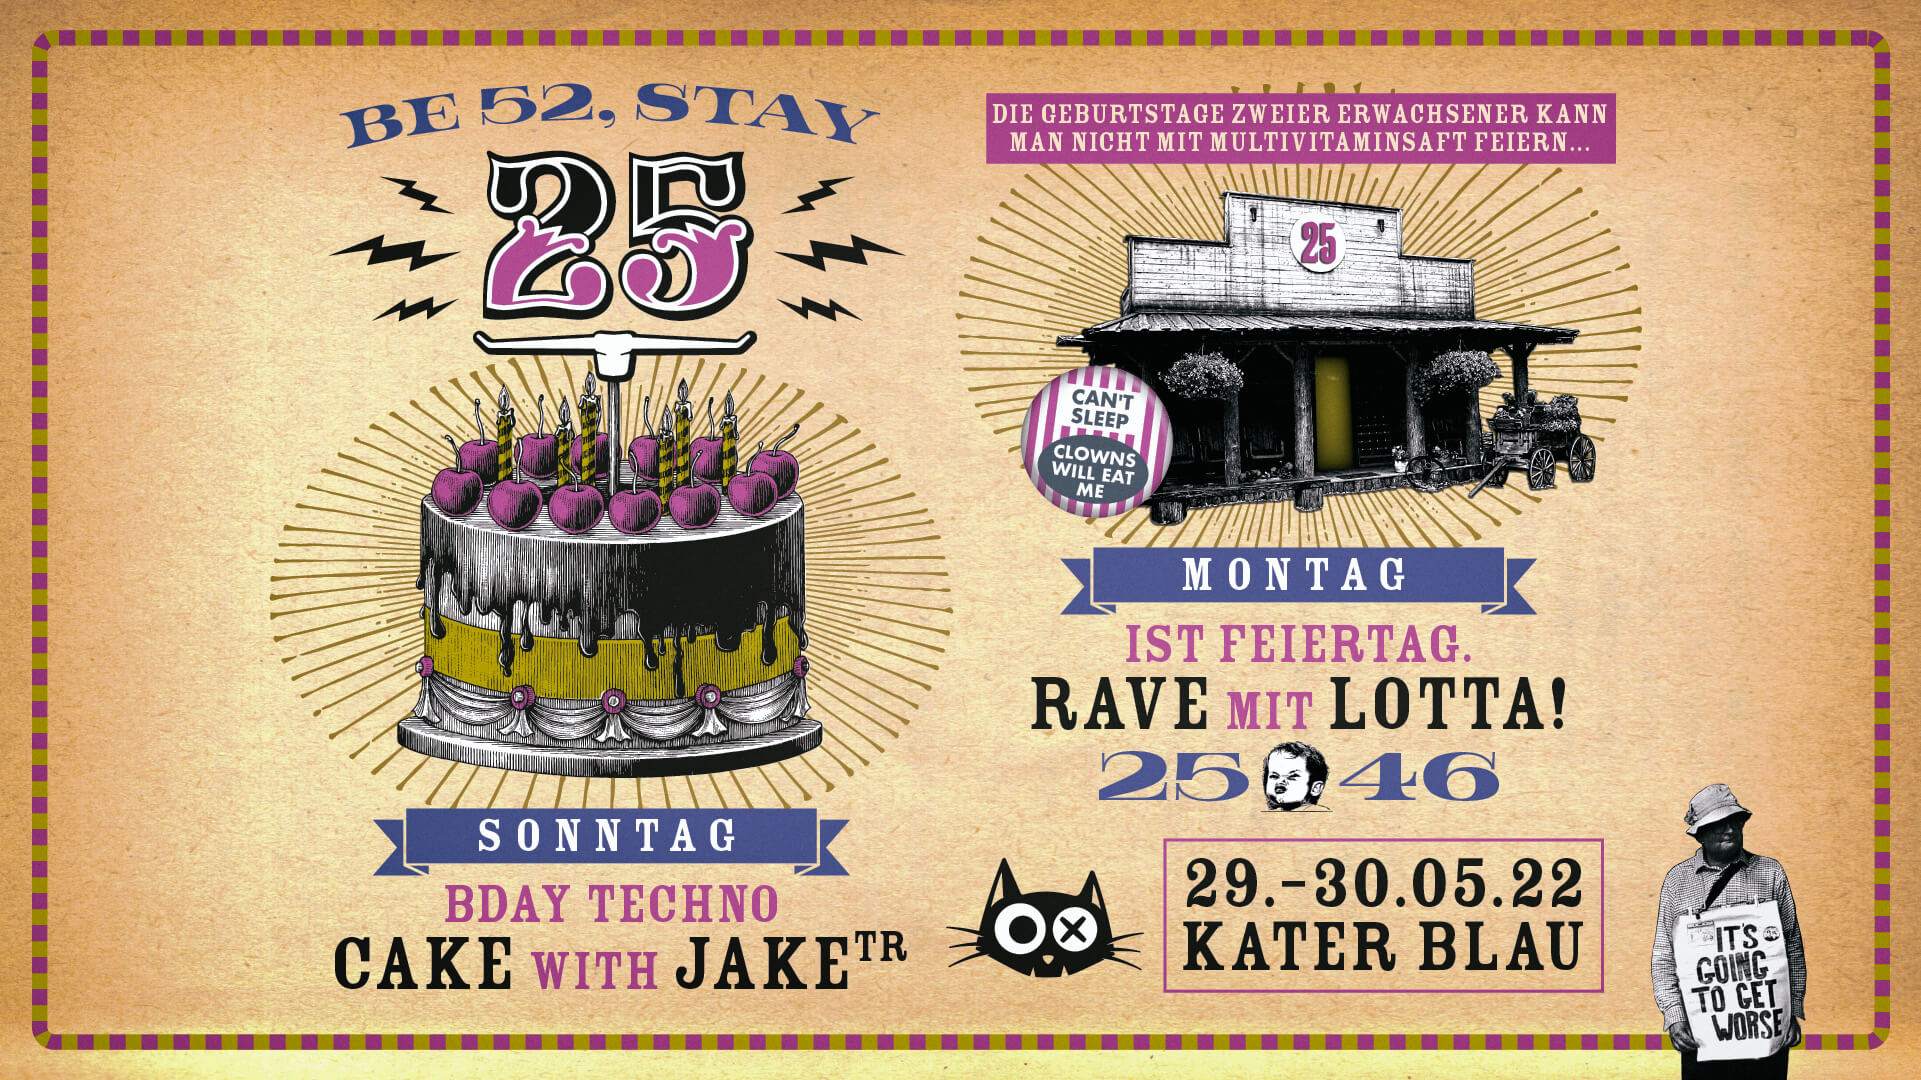 BE 52, STAY 25 / CAKE WITH JAKE / RAVE MIT LOTTA - フライヤー表